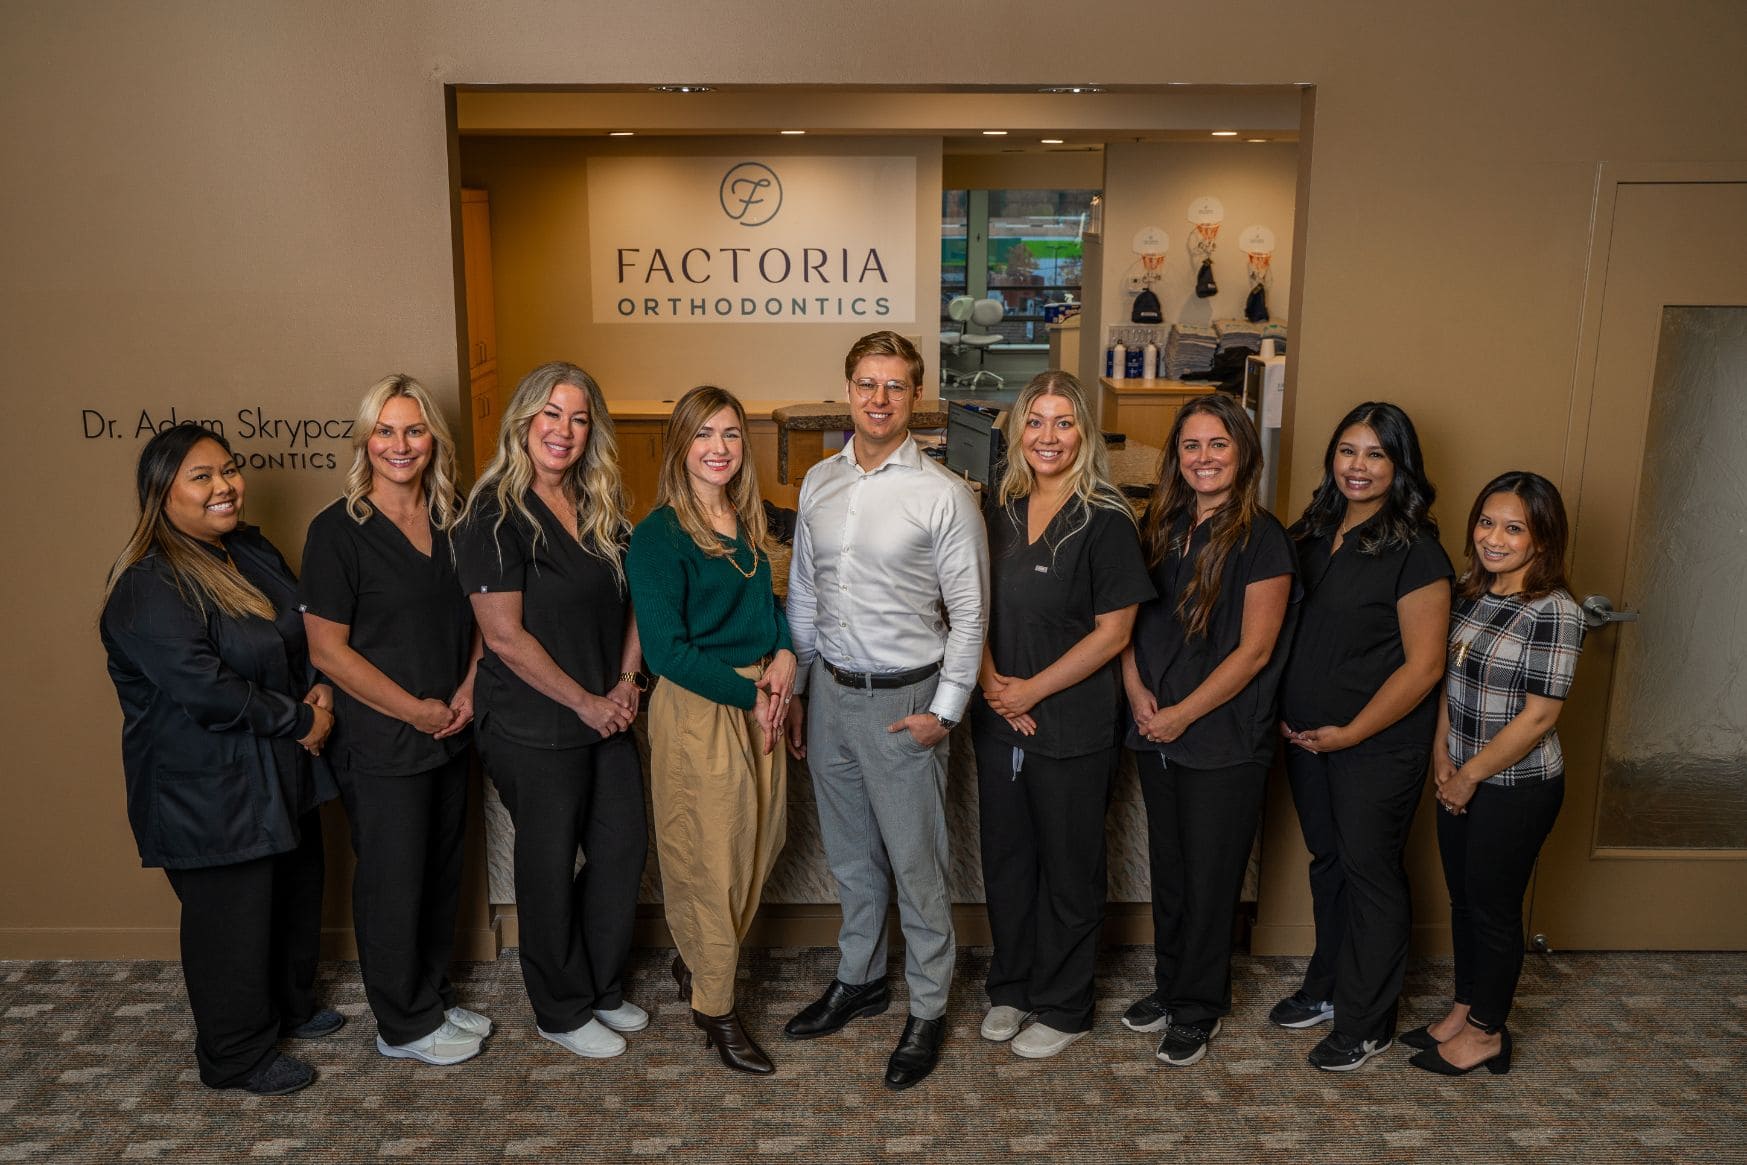 The team posing in front of the Factoria dental office.